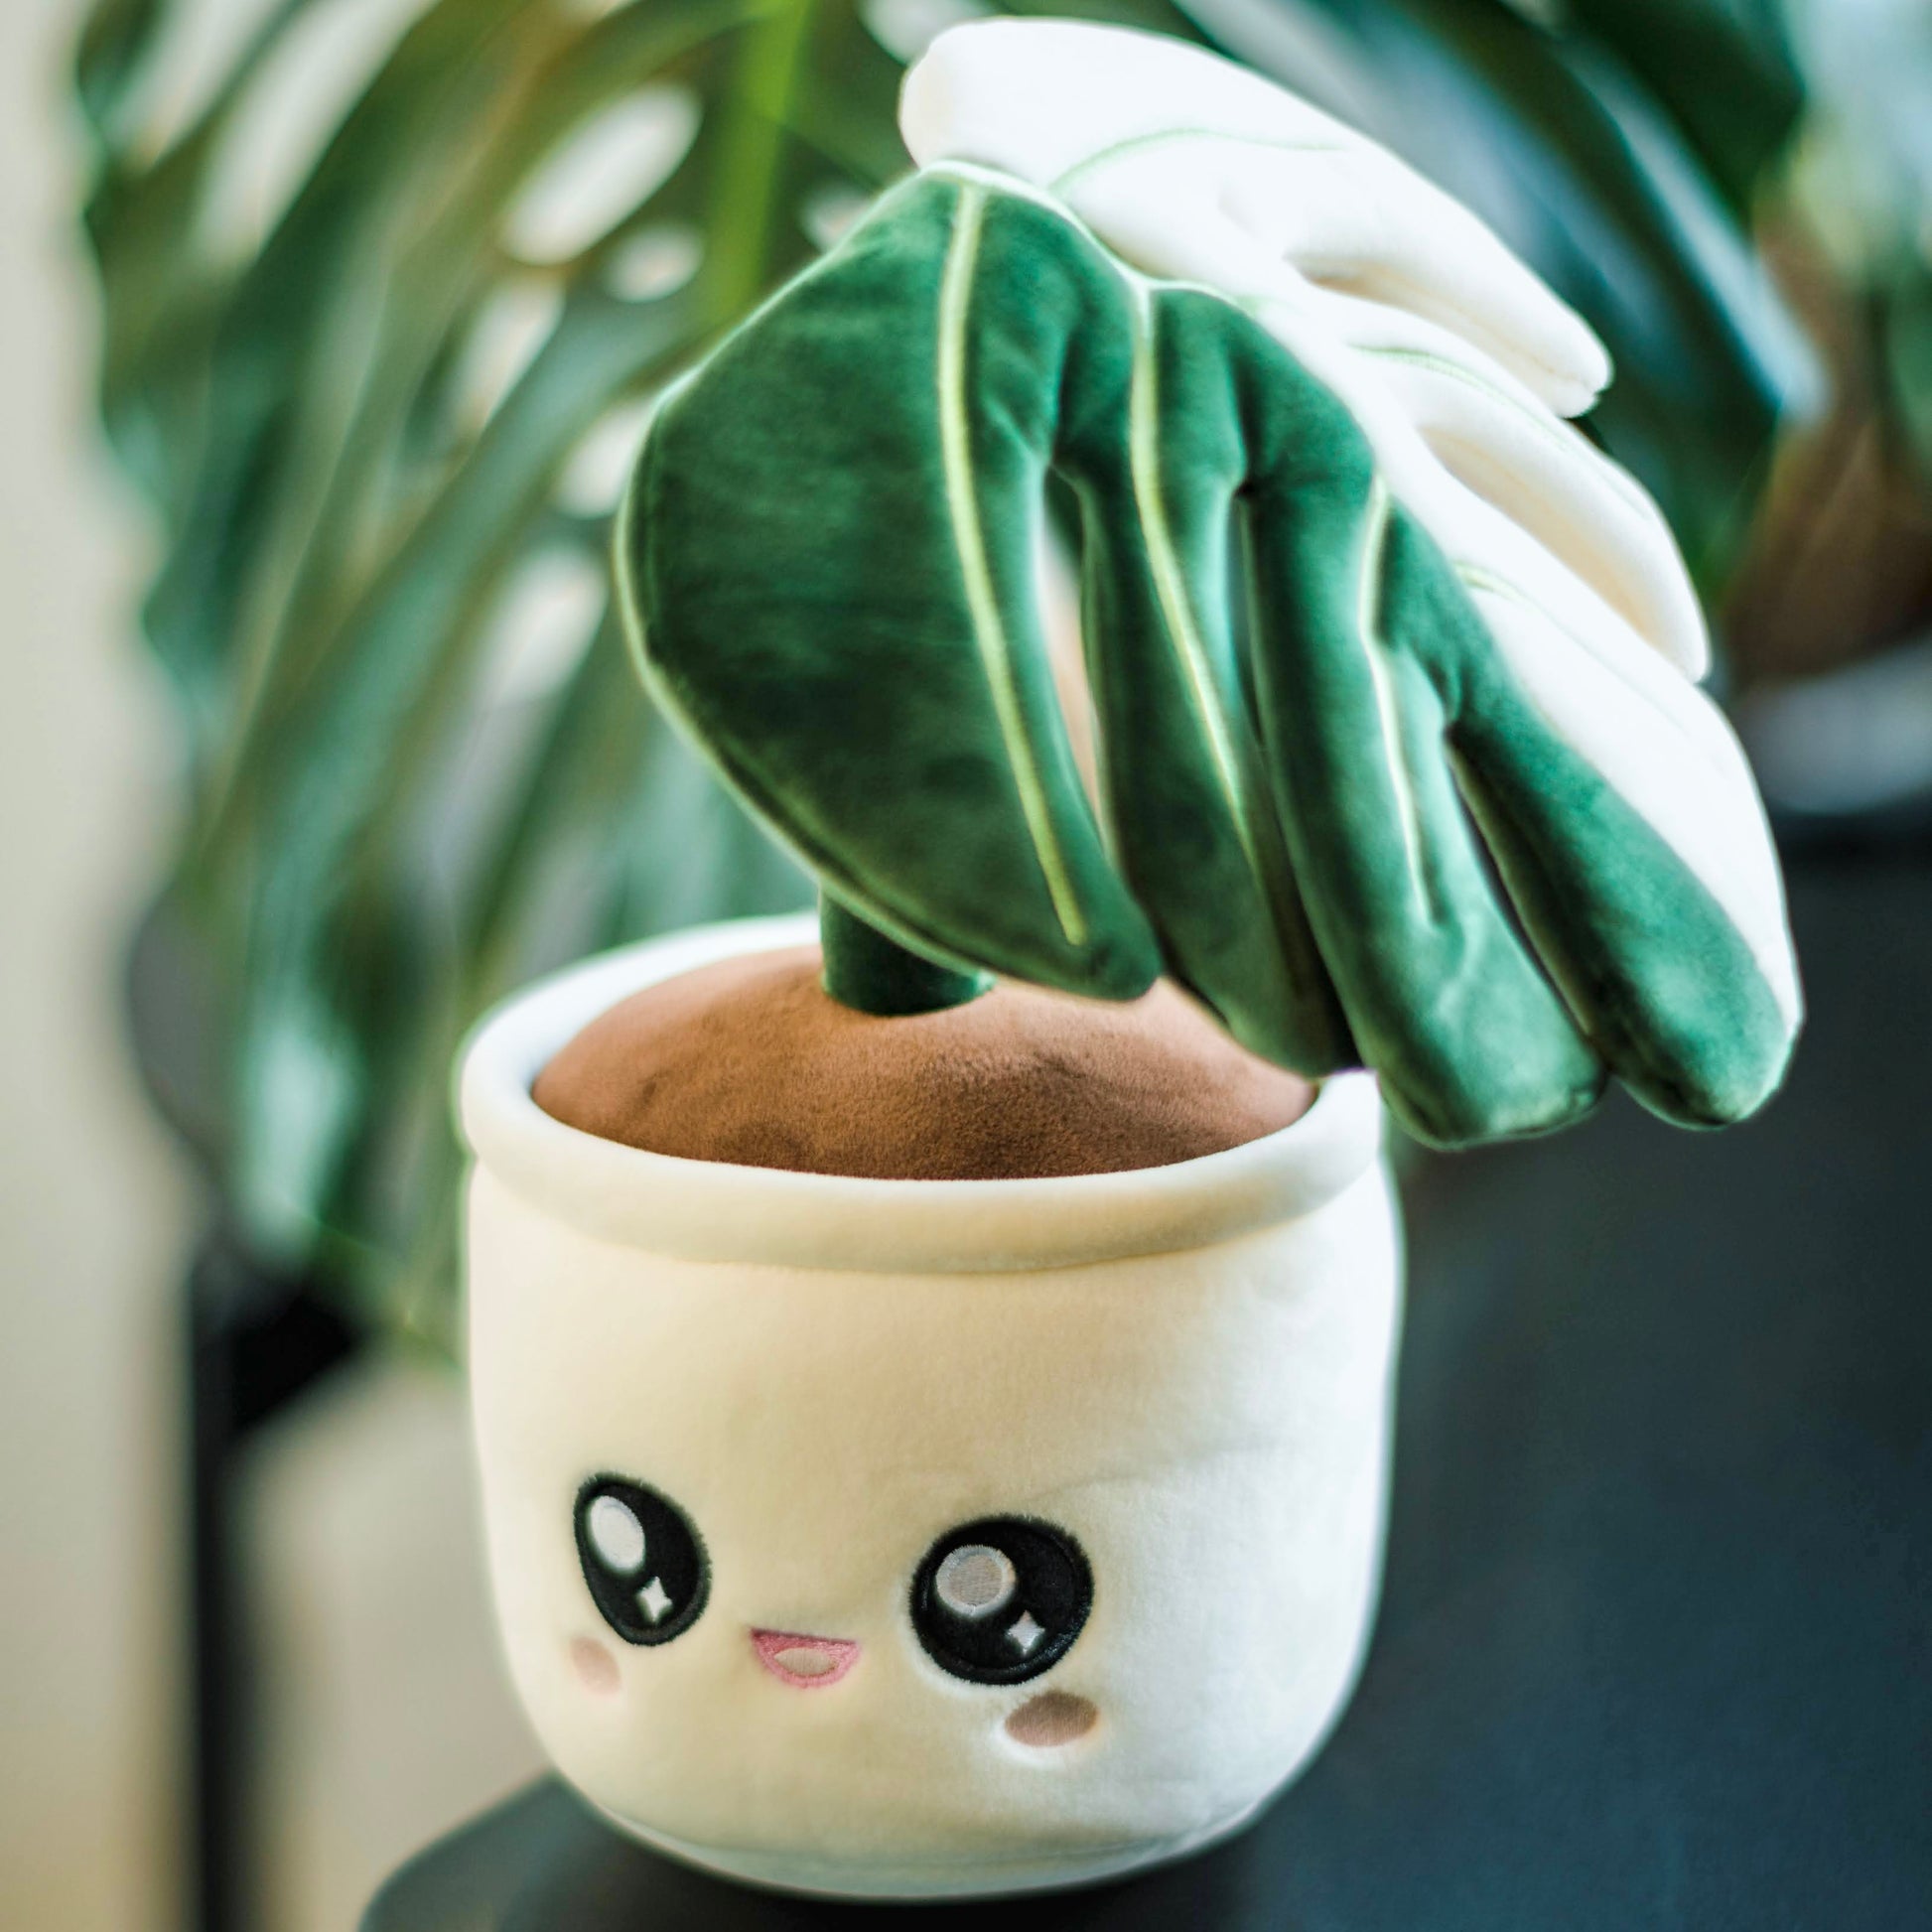 Plush toy of a potted plant with a white pot and a cute open-mouthed smiling face on the pot. The plant is a single leaf of a Monstera deliciosa albo variegata, featuring a split color pattern. The left half of the leaf is green, while the right half is white. The plush toy is placed on a black seat, with another green houseplant positioned behind it.